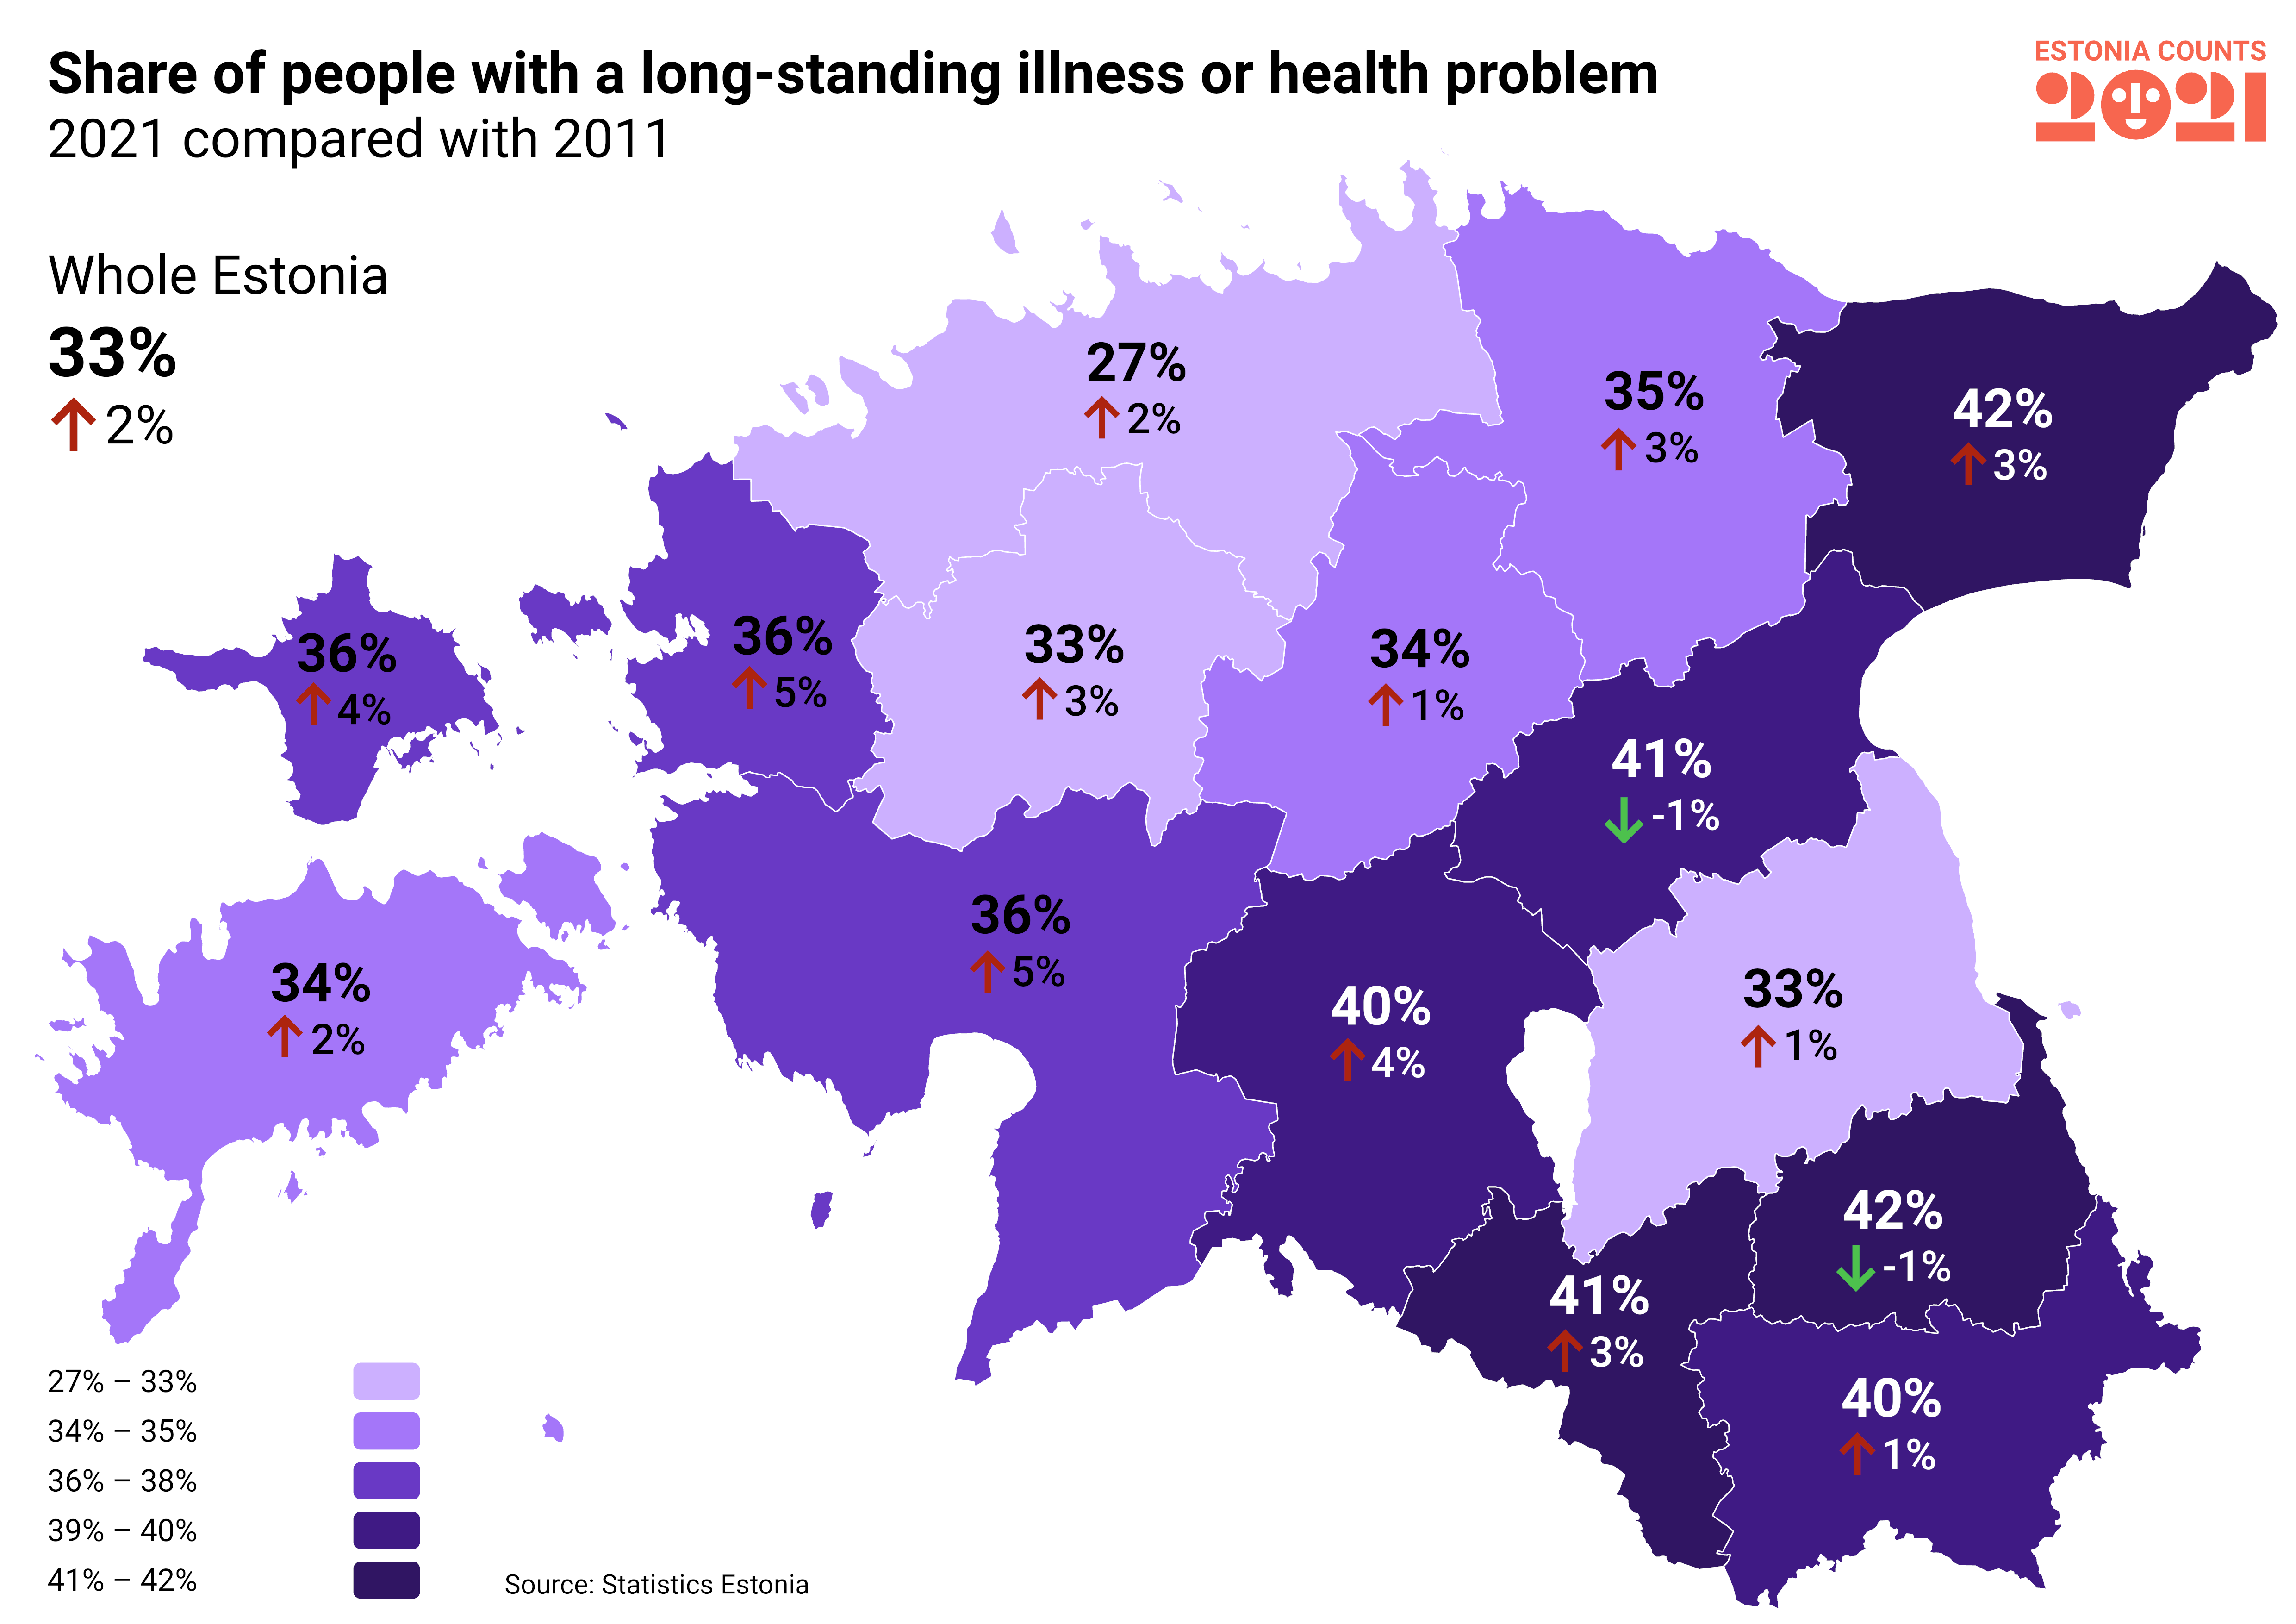 Share of people with a long-standing illness or health problem